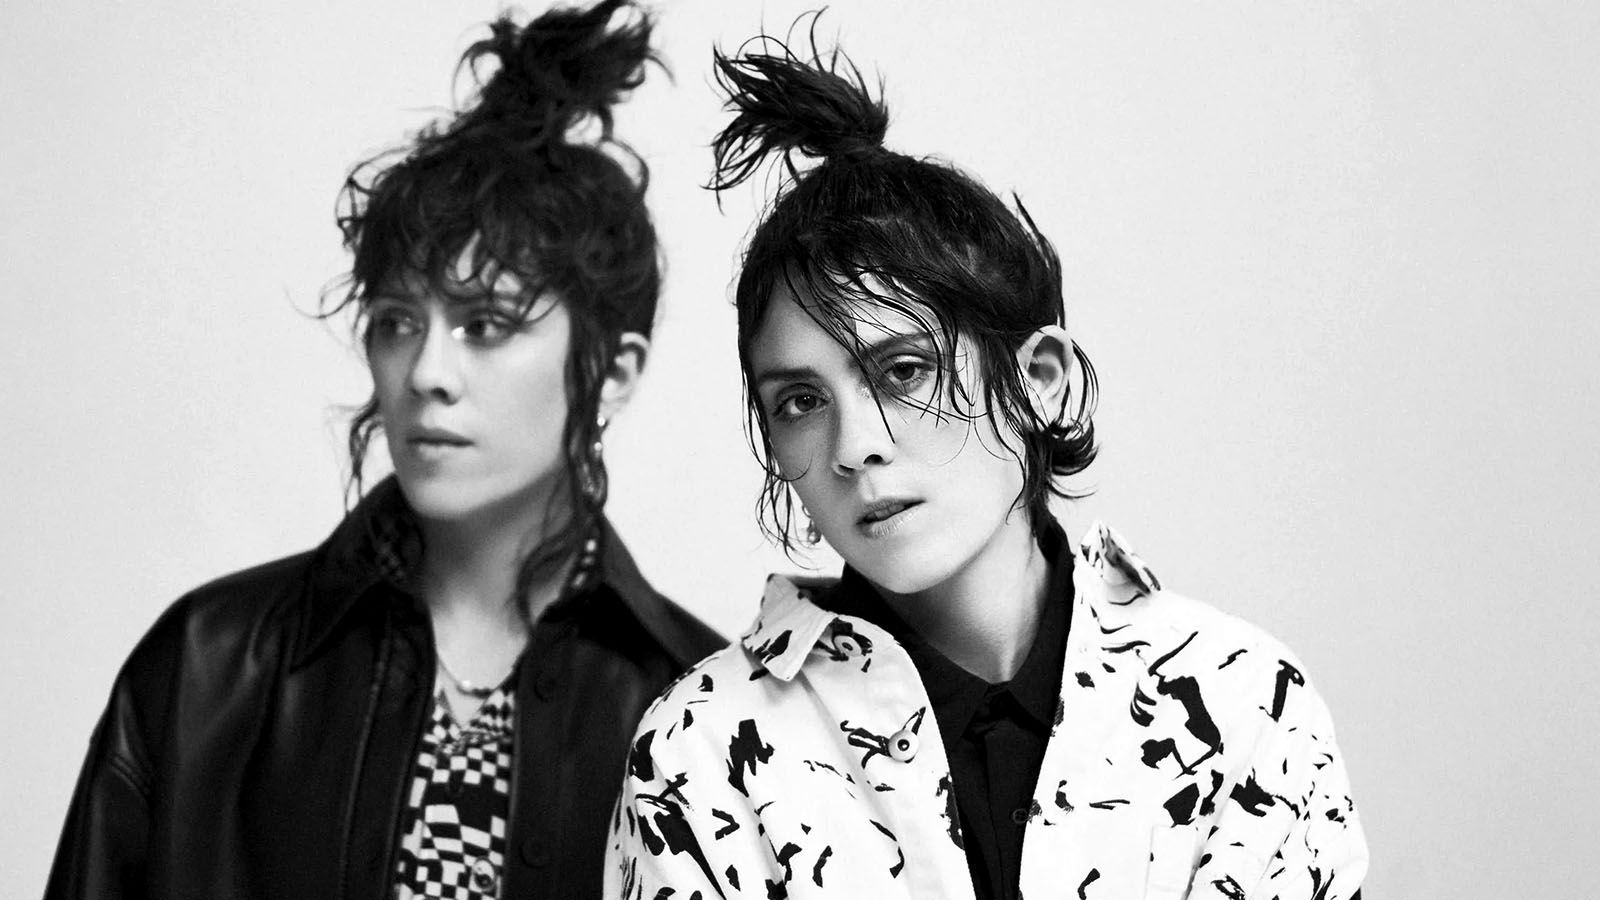 Tegan and Sara are preparing to tour in support of a new album.